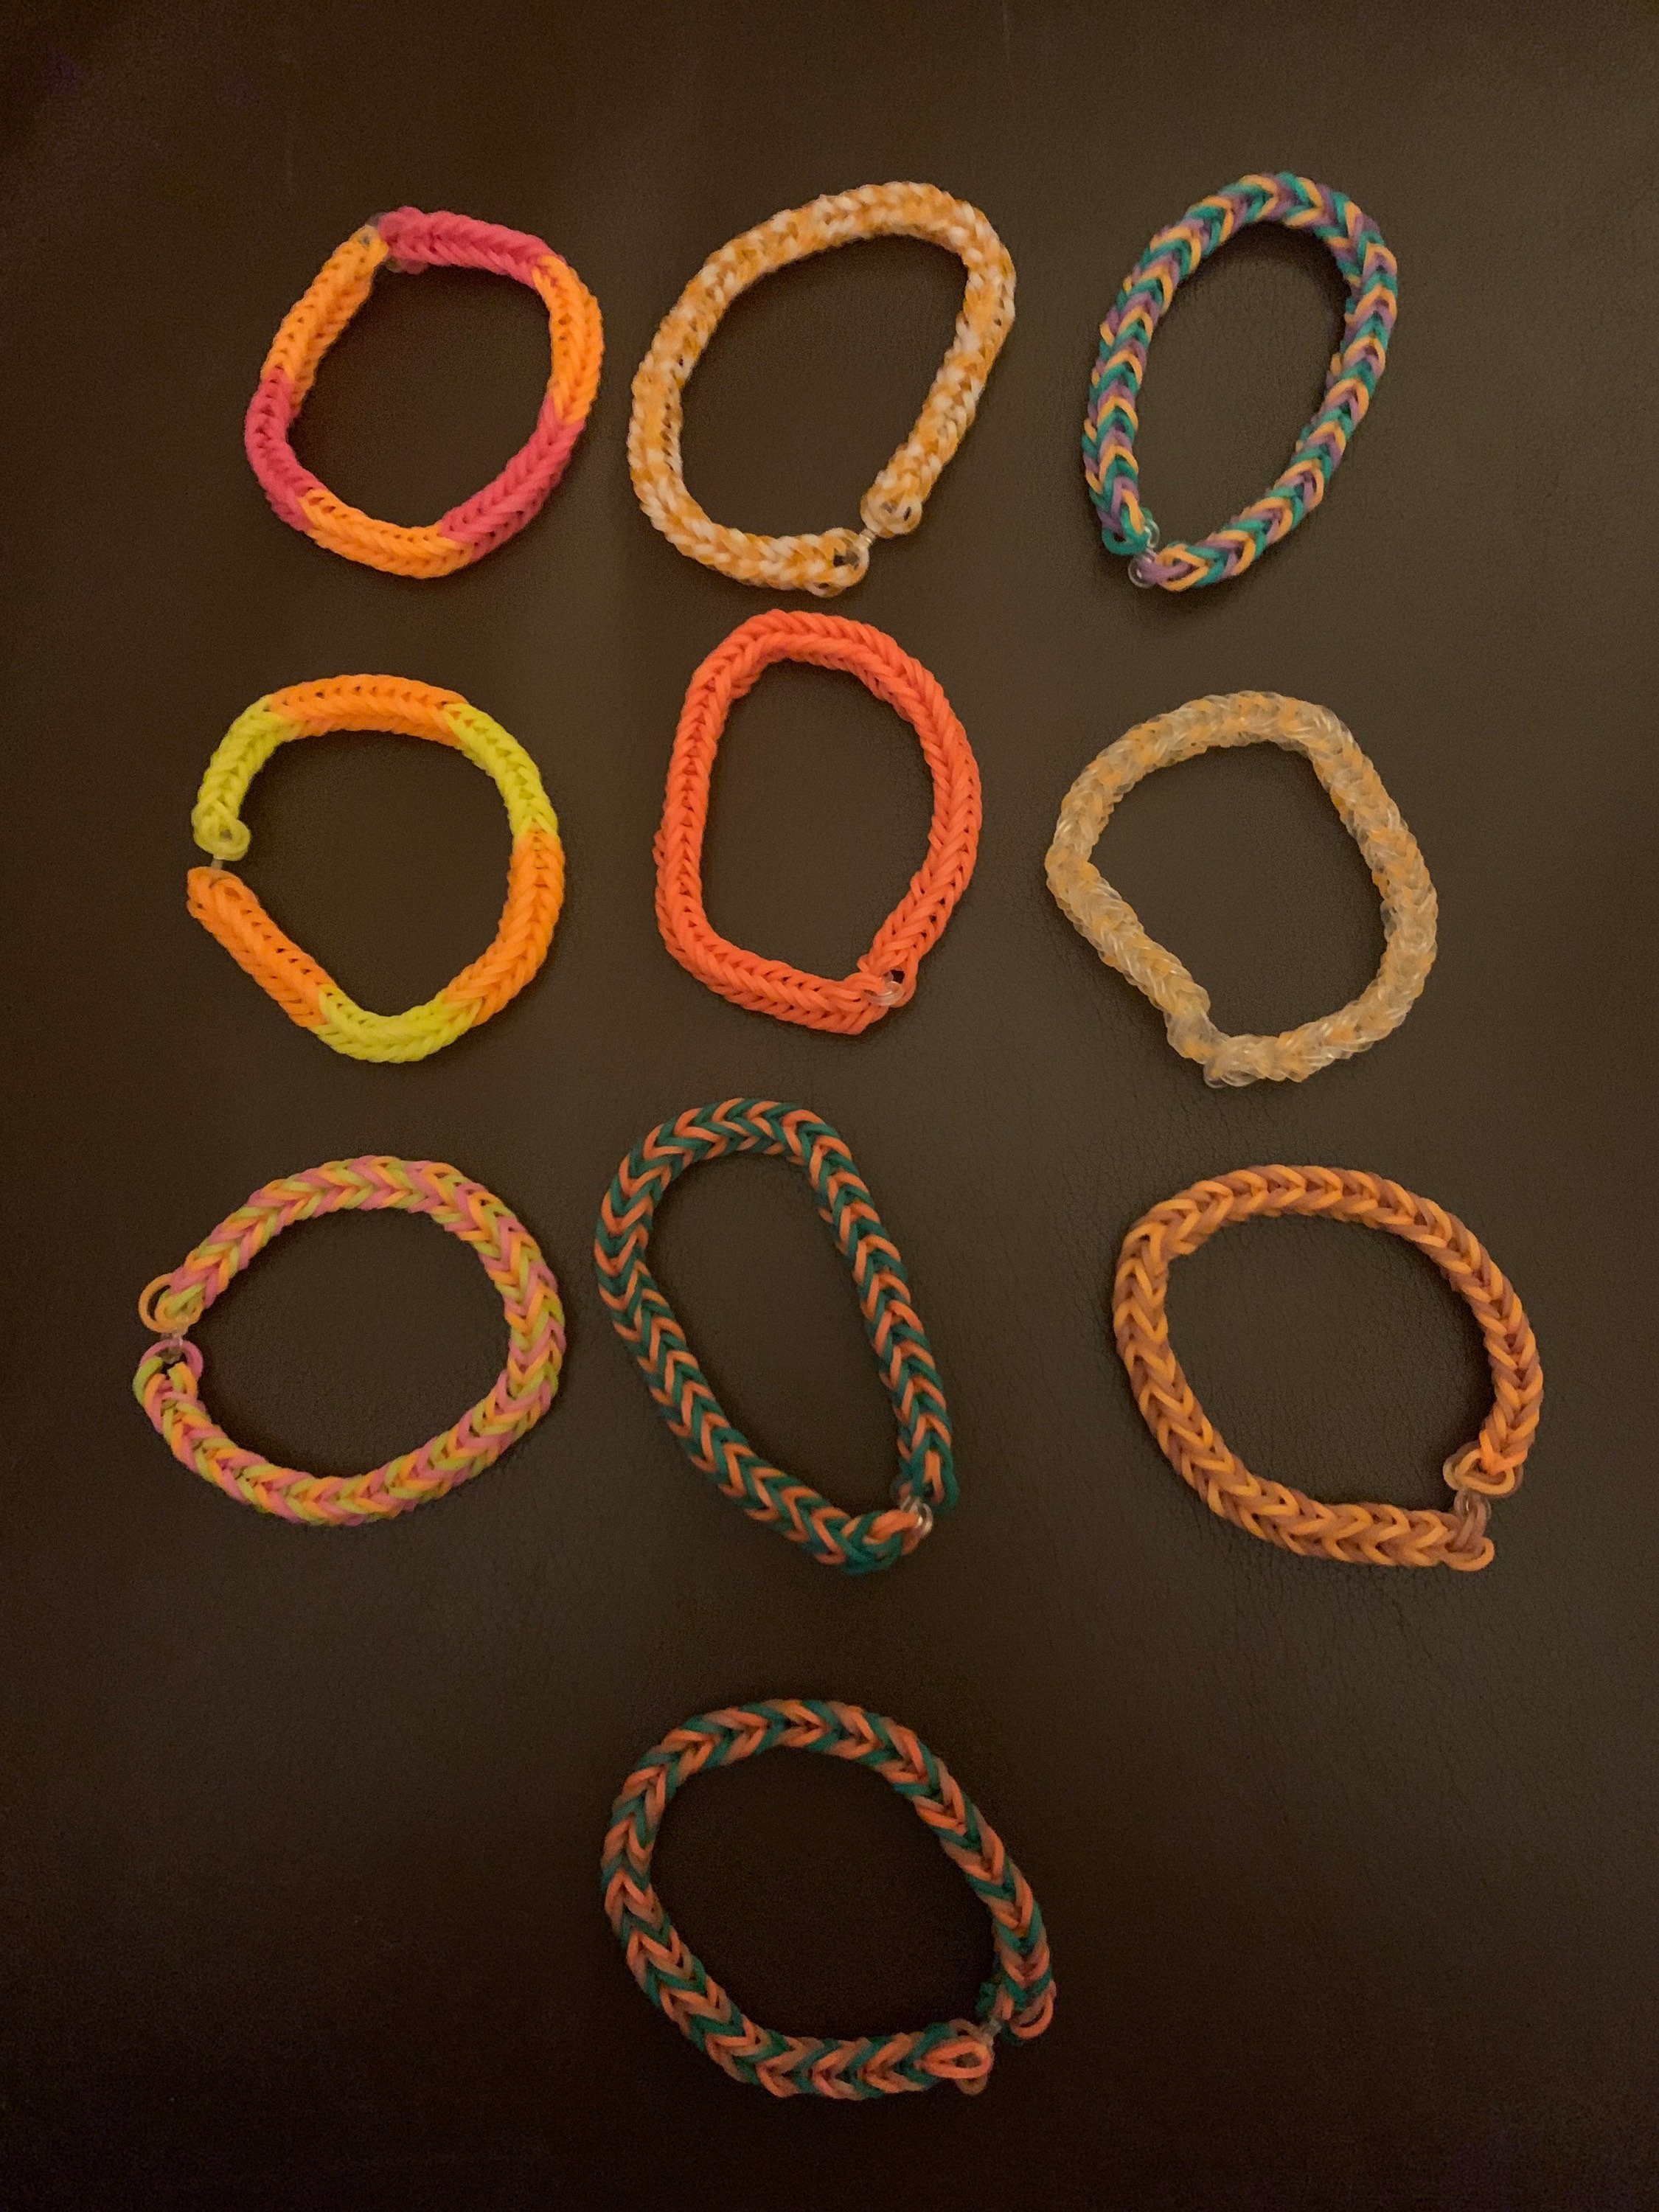 Simple Rubber Band Bracelet Easy Rainbow Band Bracelet With The Loom ...